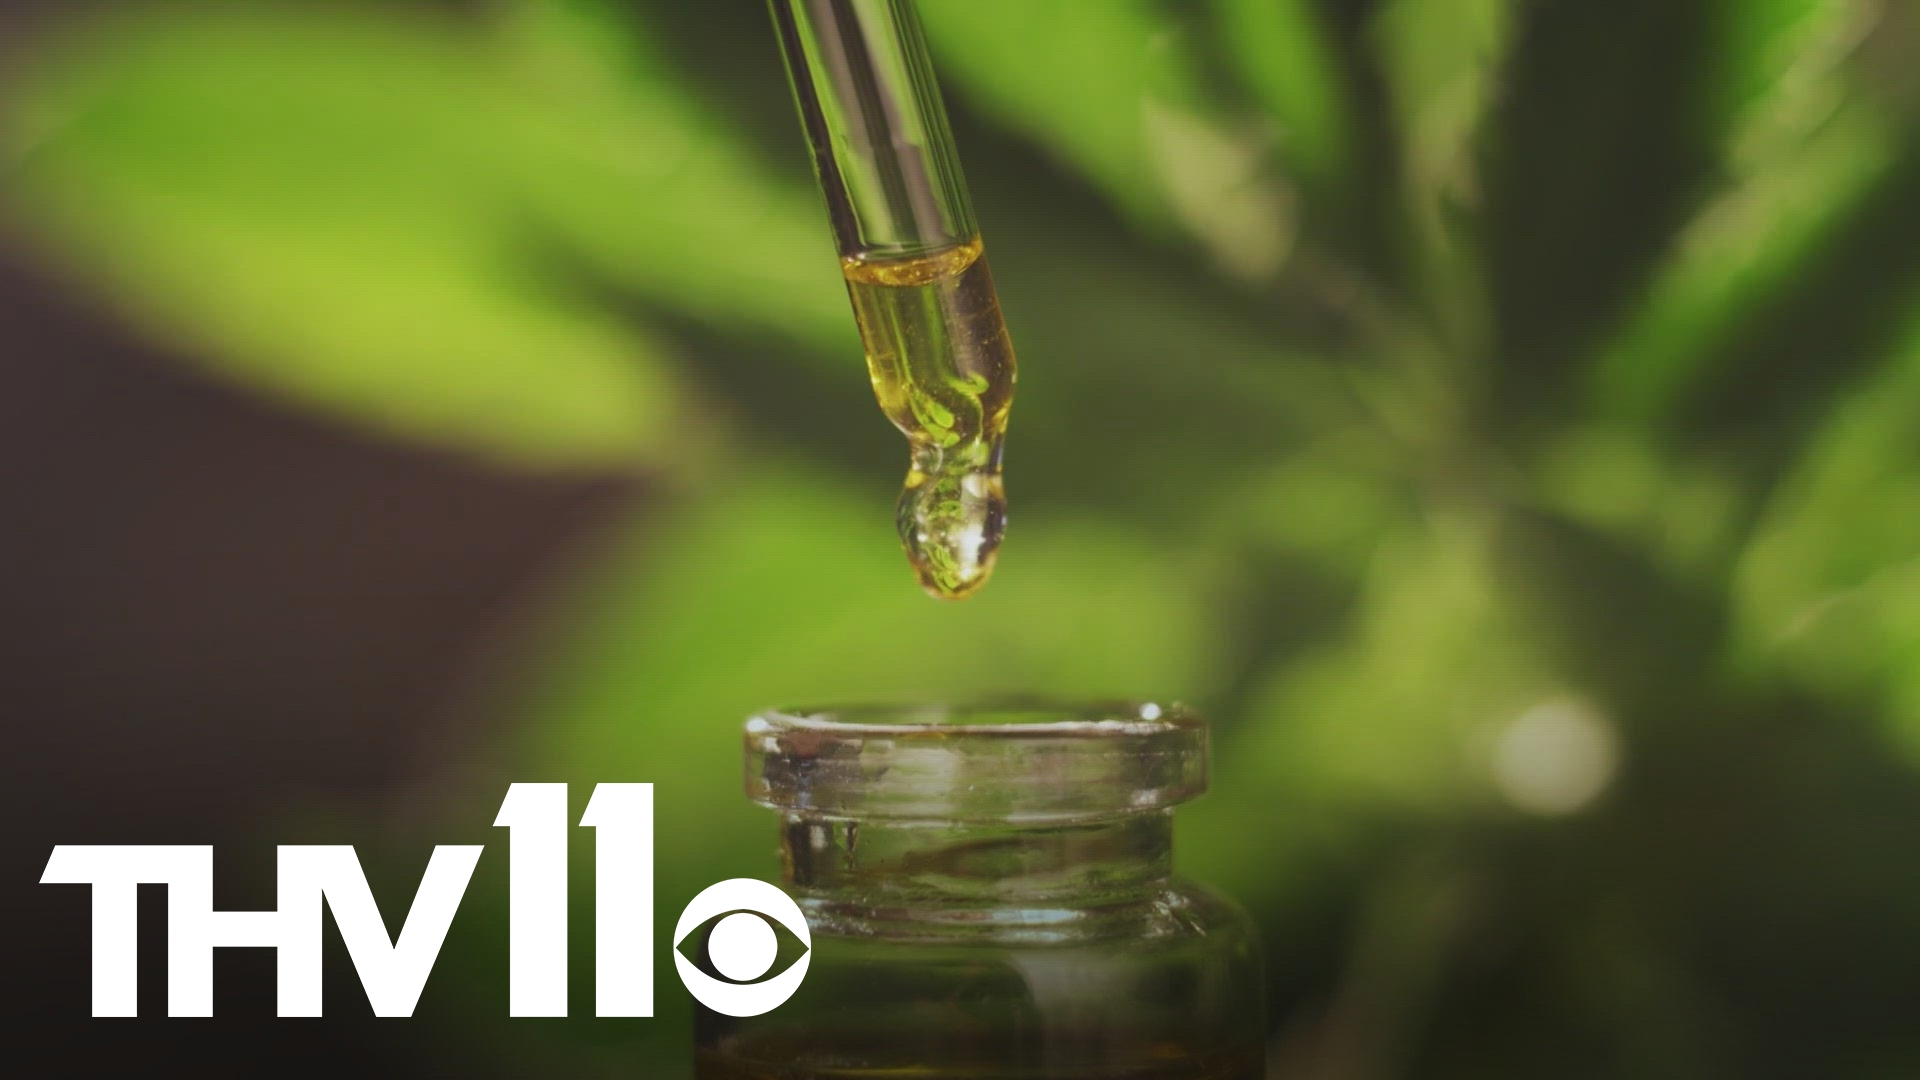 Products derived from cannabis are showing up on more and more drug screens, even when they are trying to avoid getting high by using CBD.